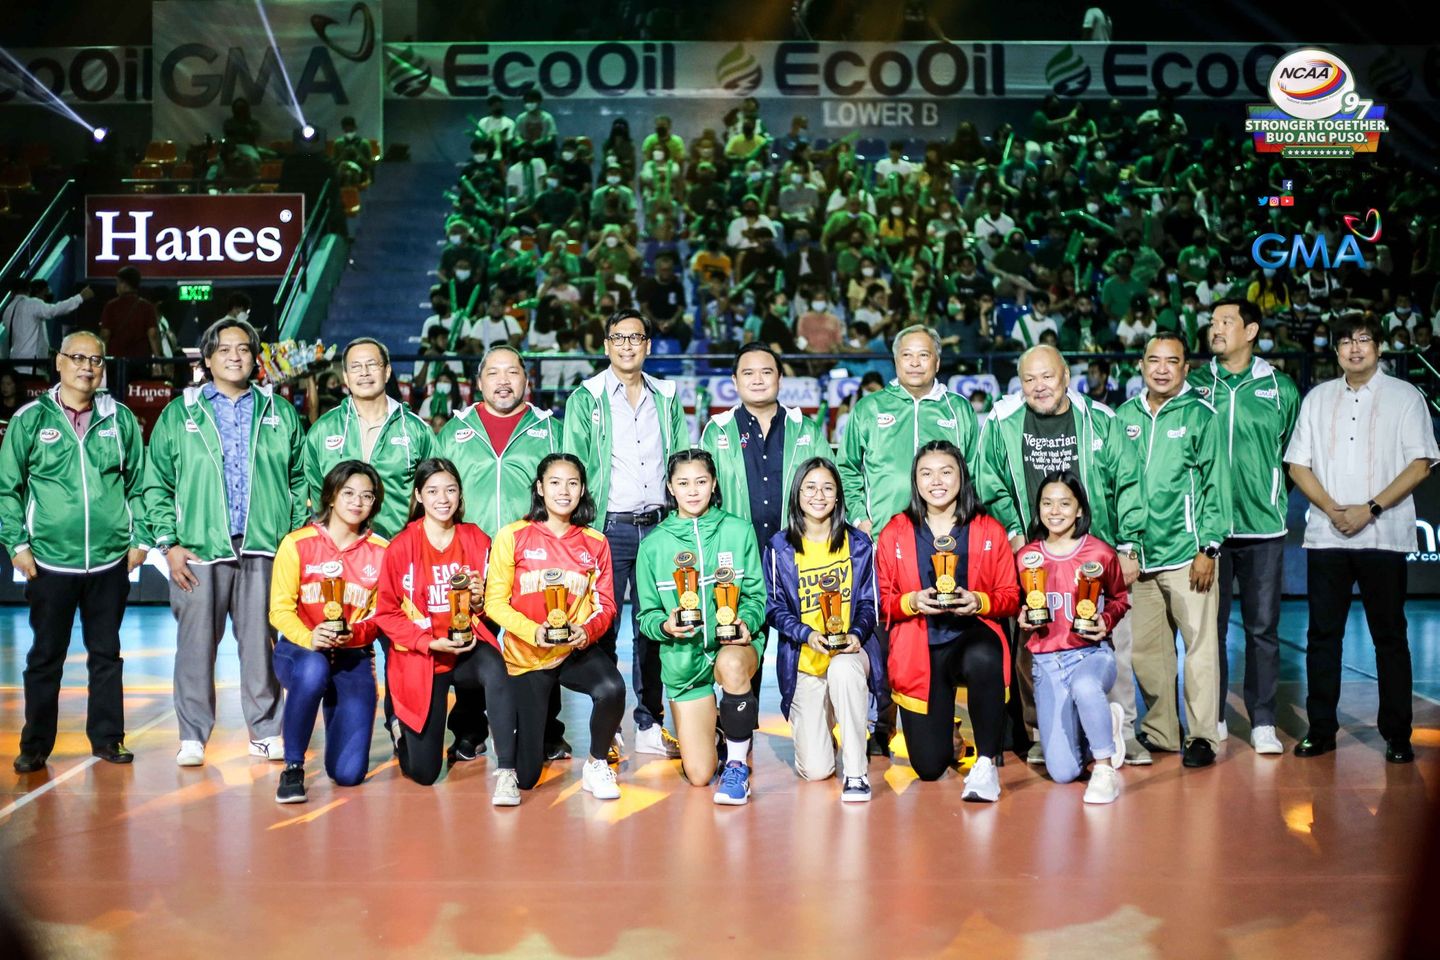 The individual awardees for the NCAA Season 97 women's volleyball tournament.